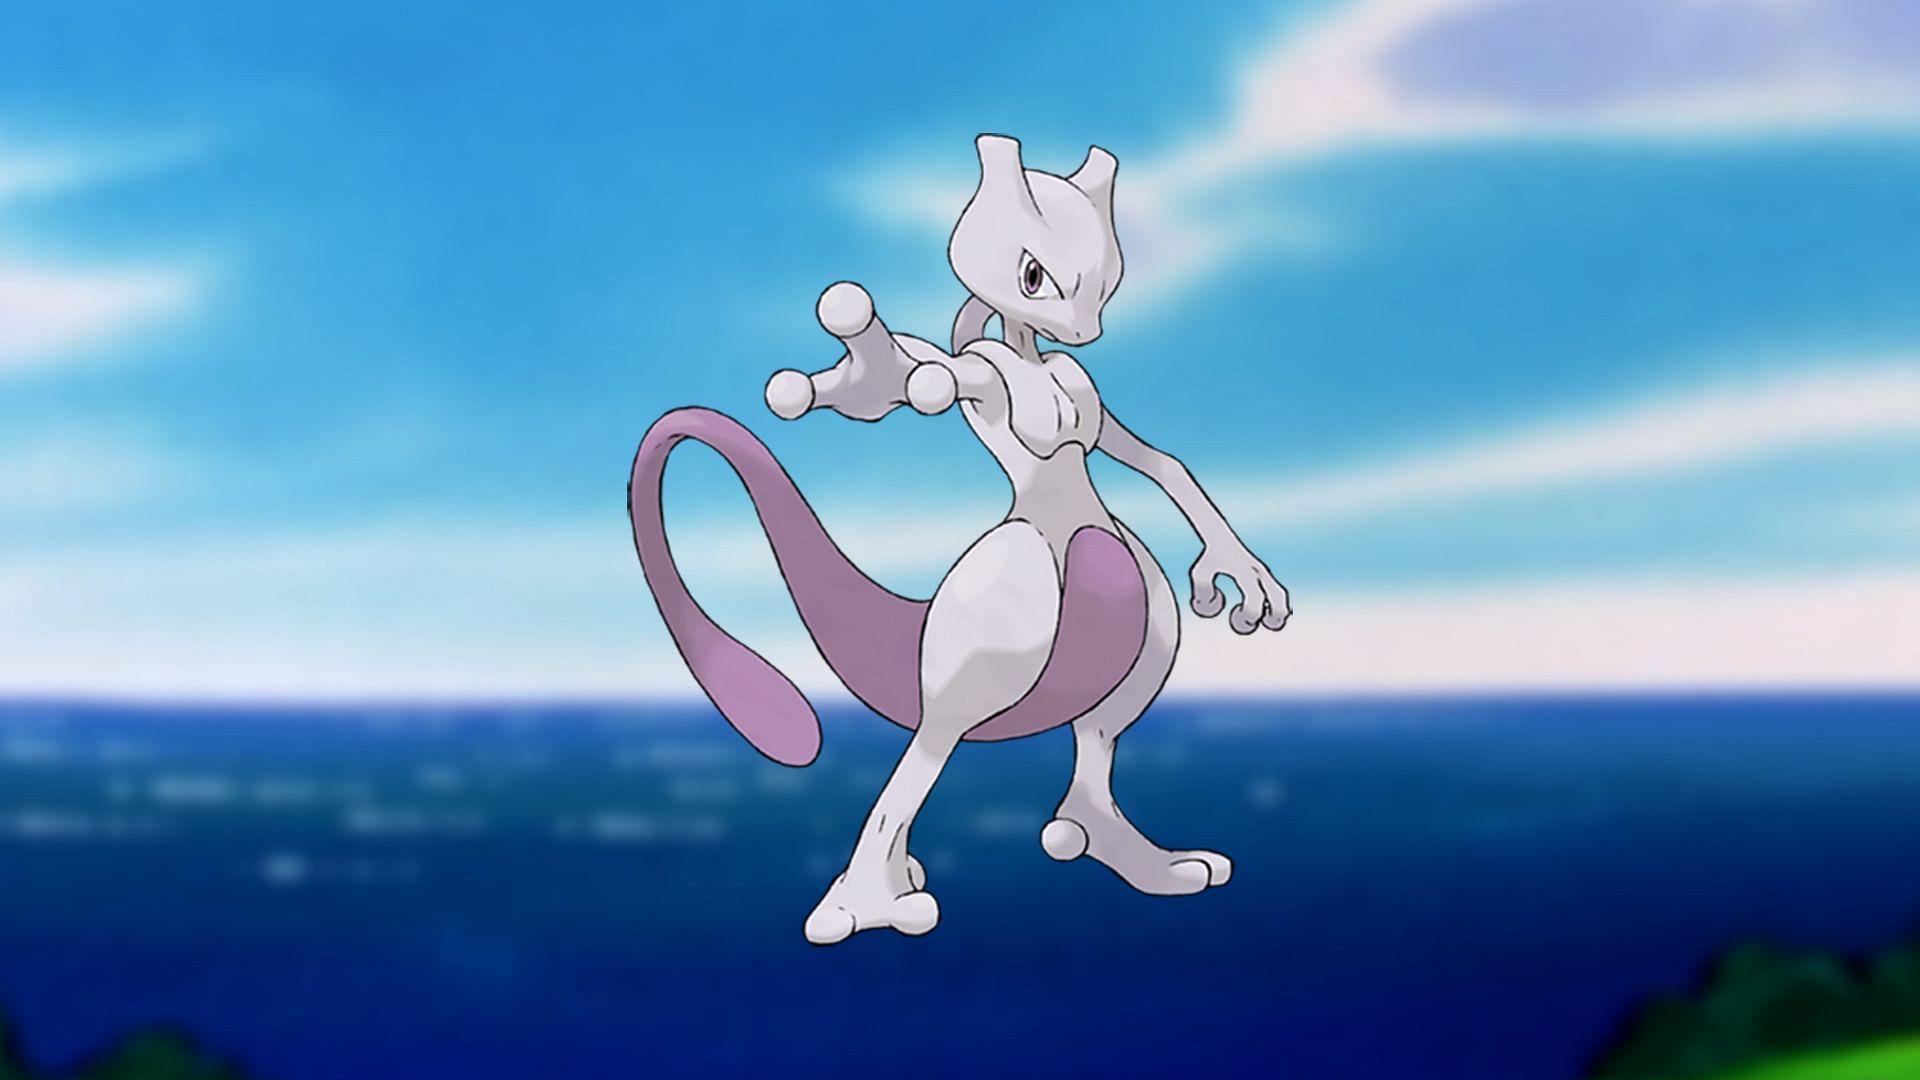 Mewtwo as it appears in the anime (Image via Niantic)